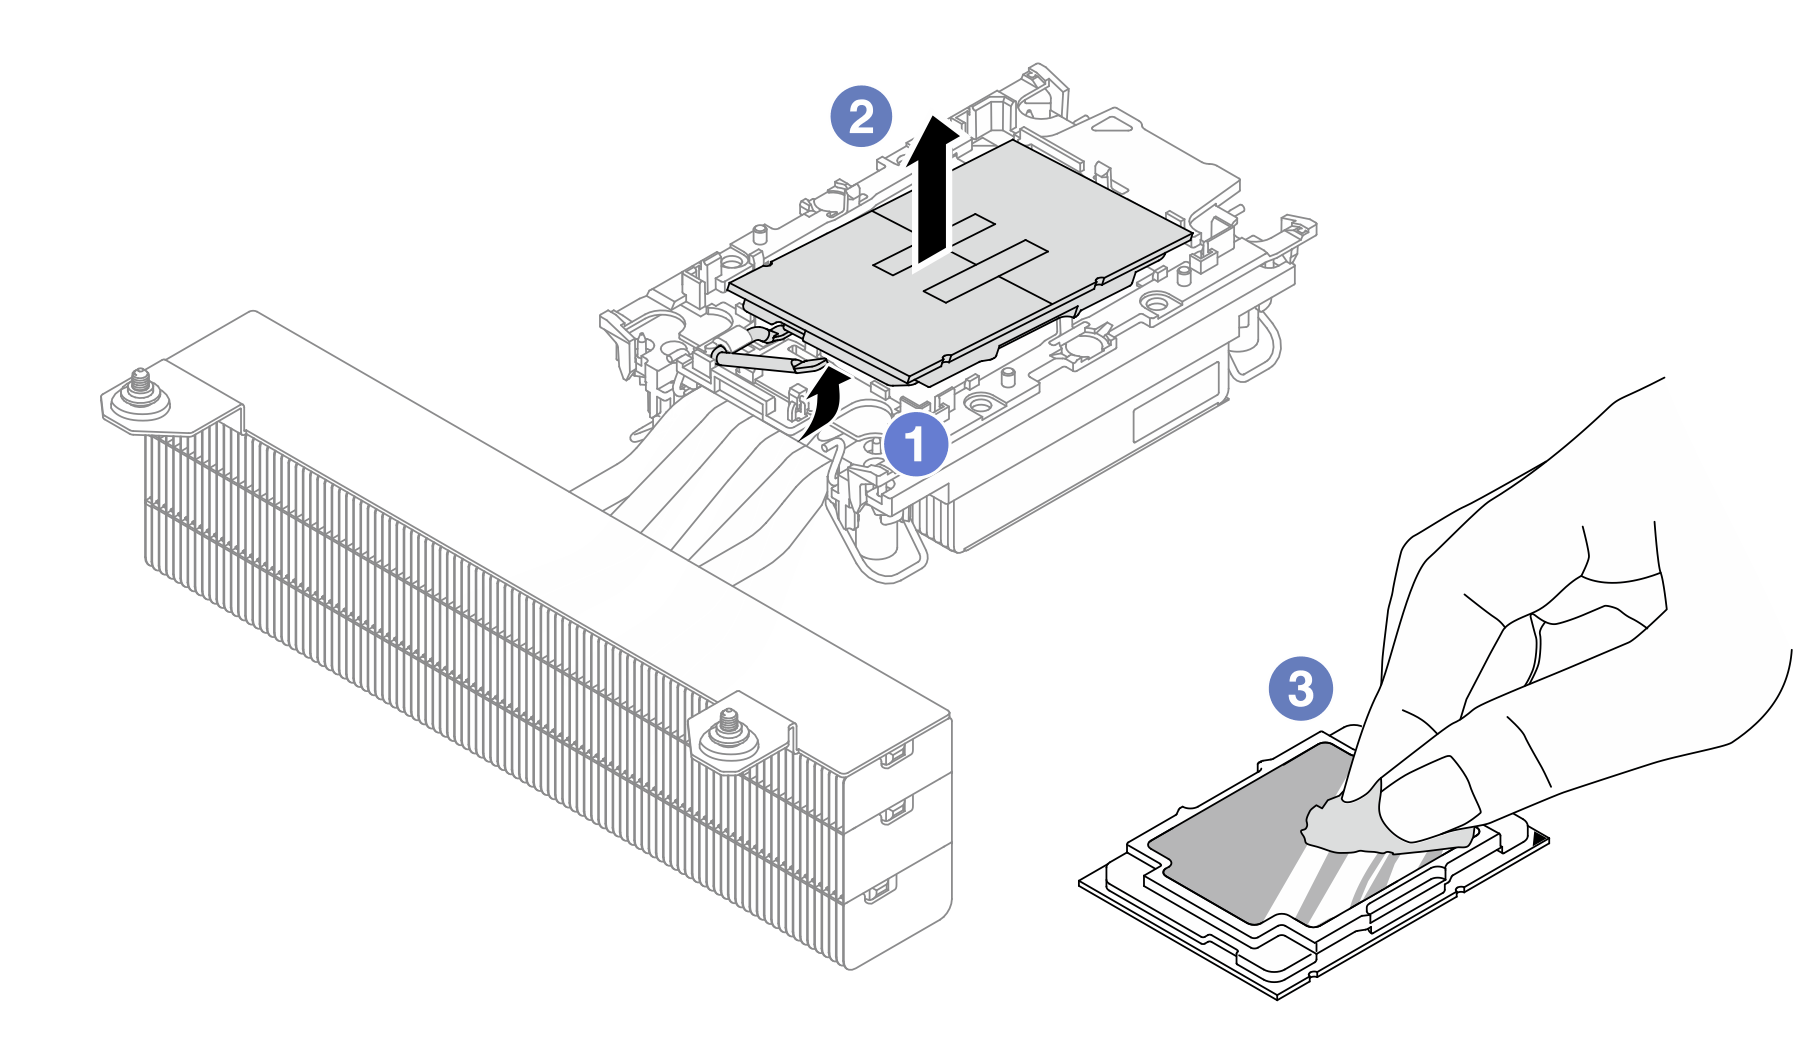 Separating a processor from the heat sink and carrier